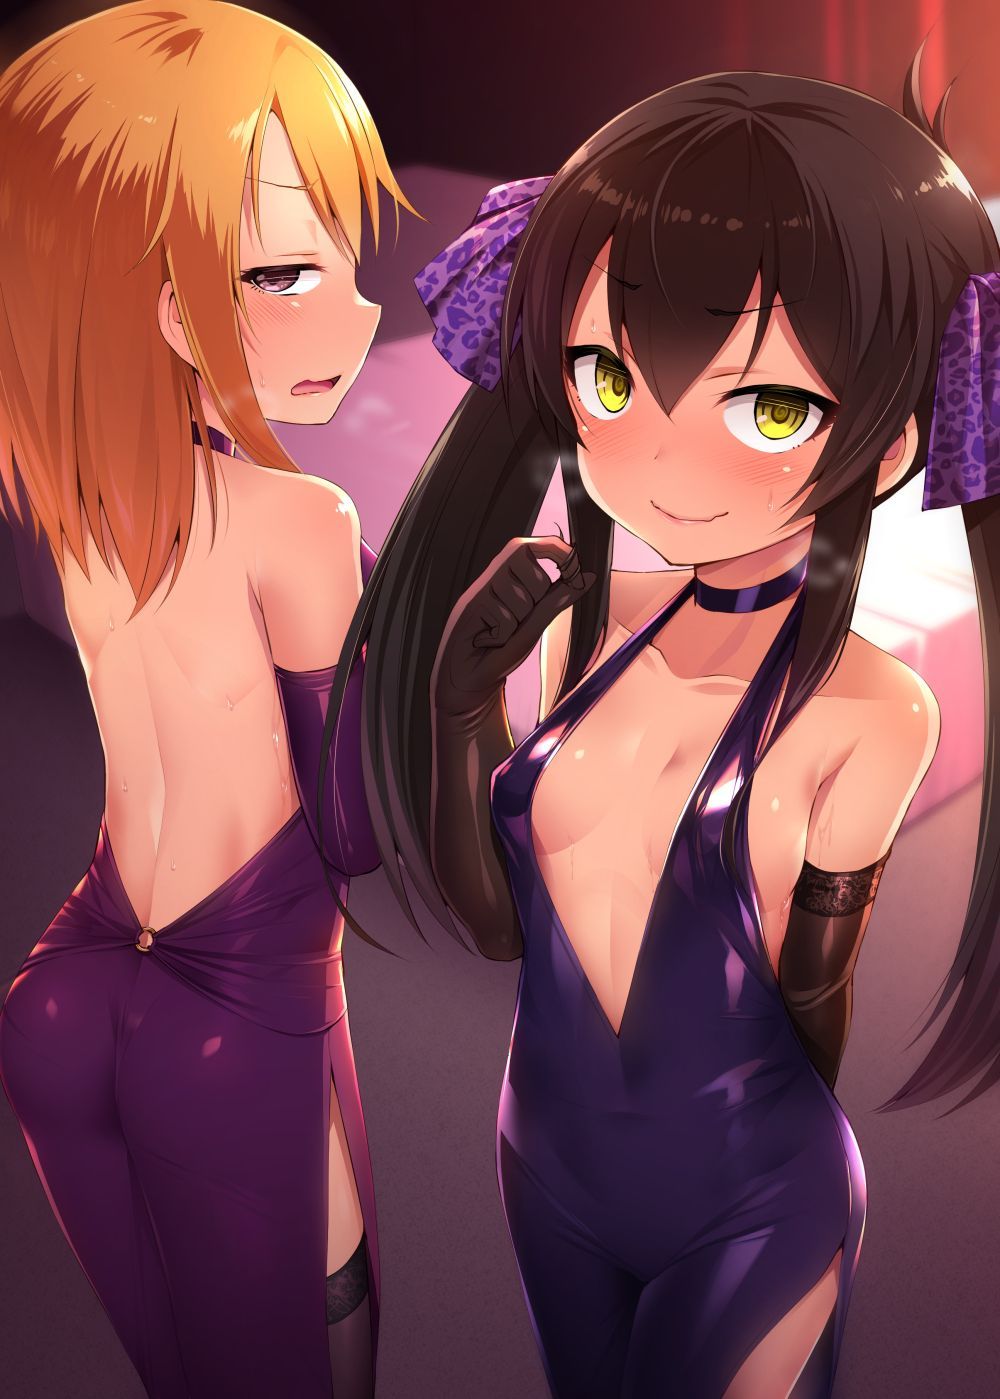 Lori Harrem erotic image come to seduce or throws here with two people in collusion and colluding with friends or sisters Lori Girl is [Temptation Loli]! 24